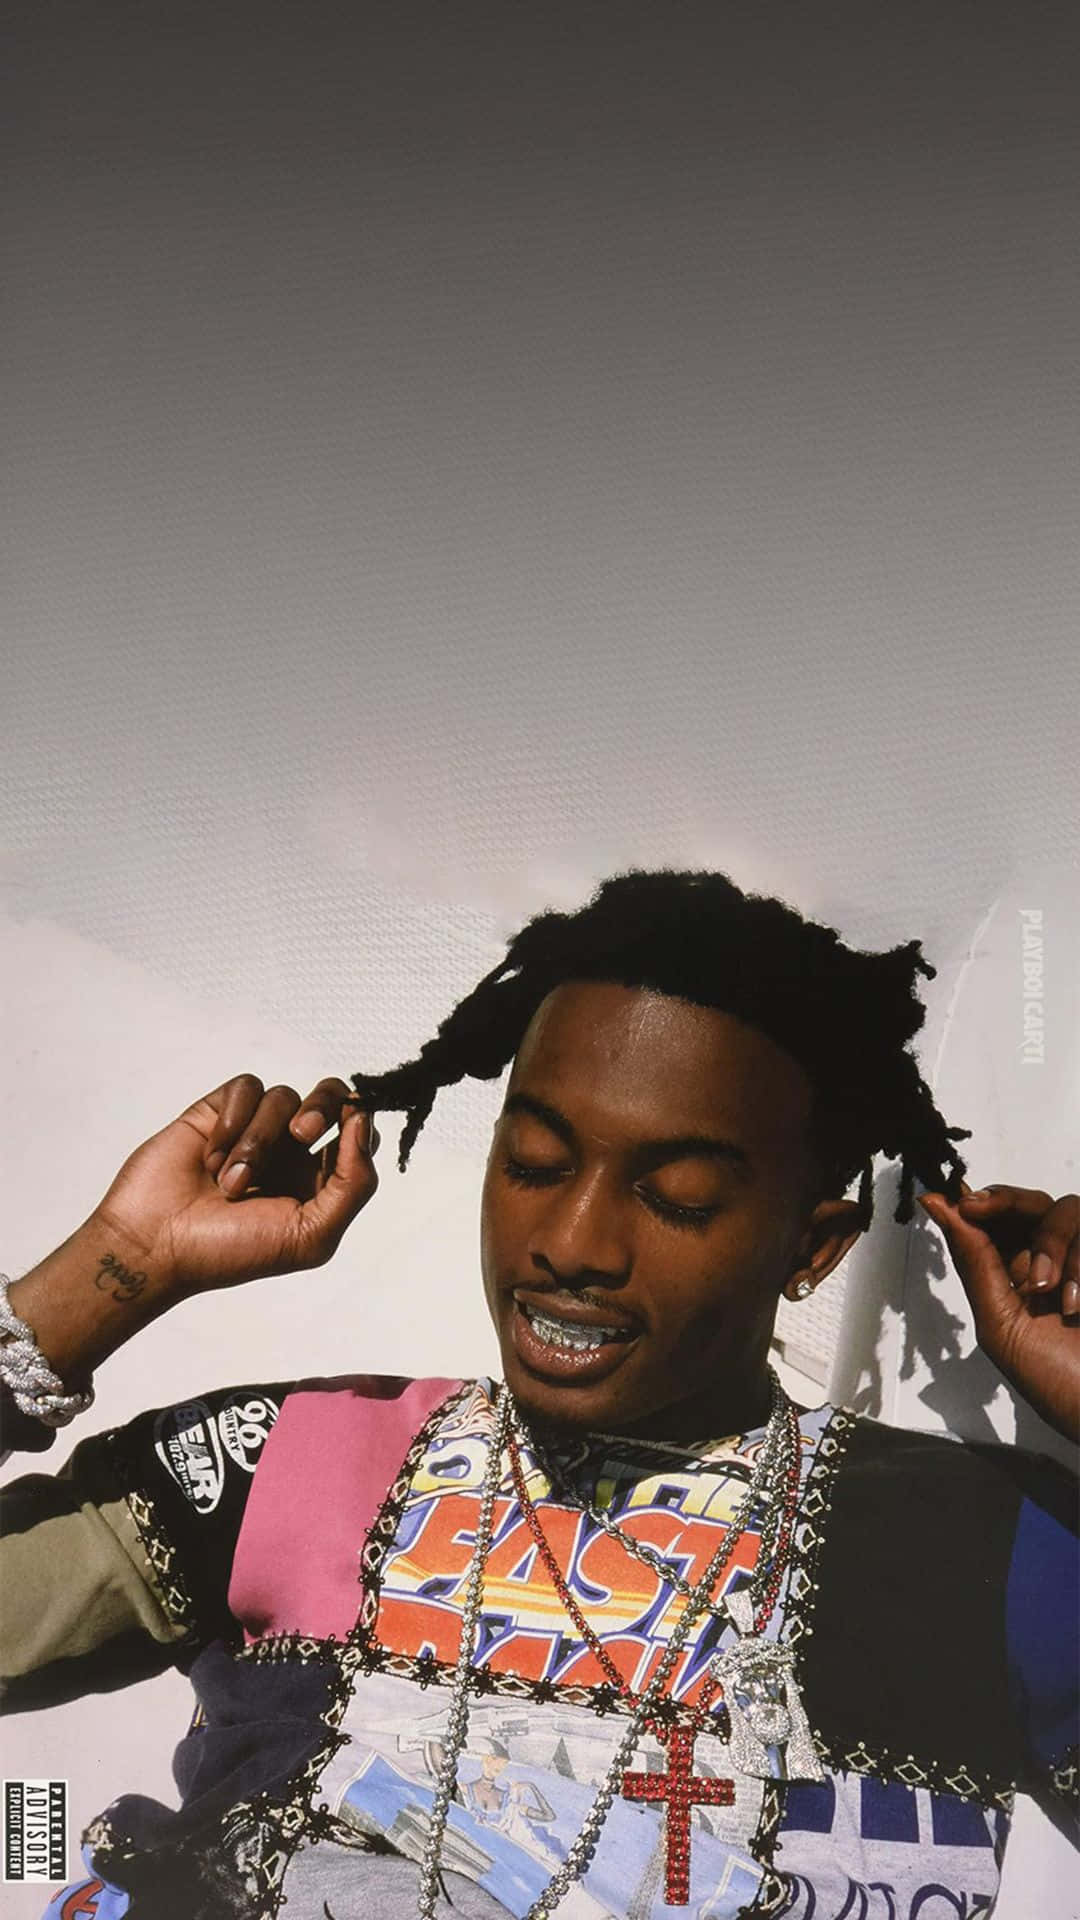 Experience Playboi Carti's music with the ultimate smartphone. Wallpaper